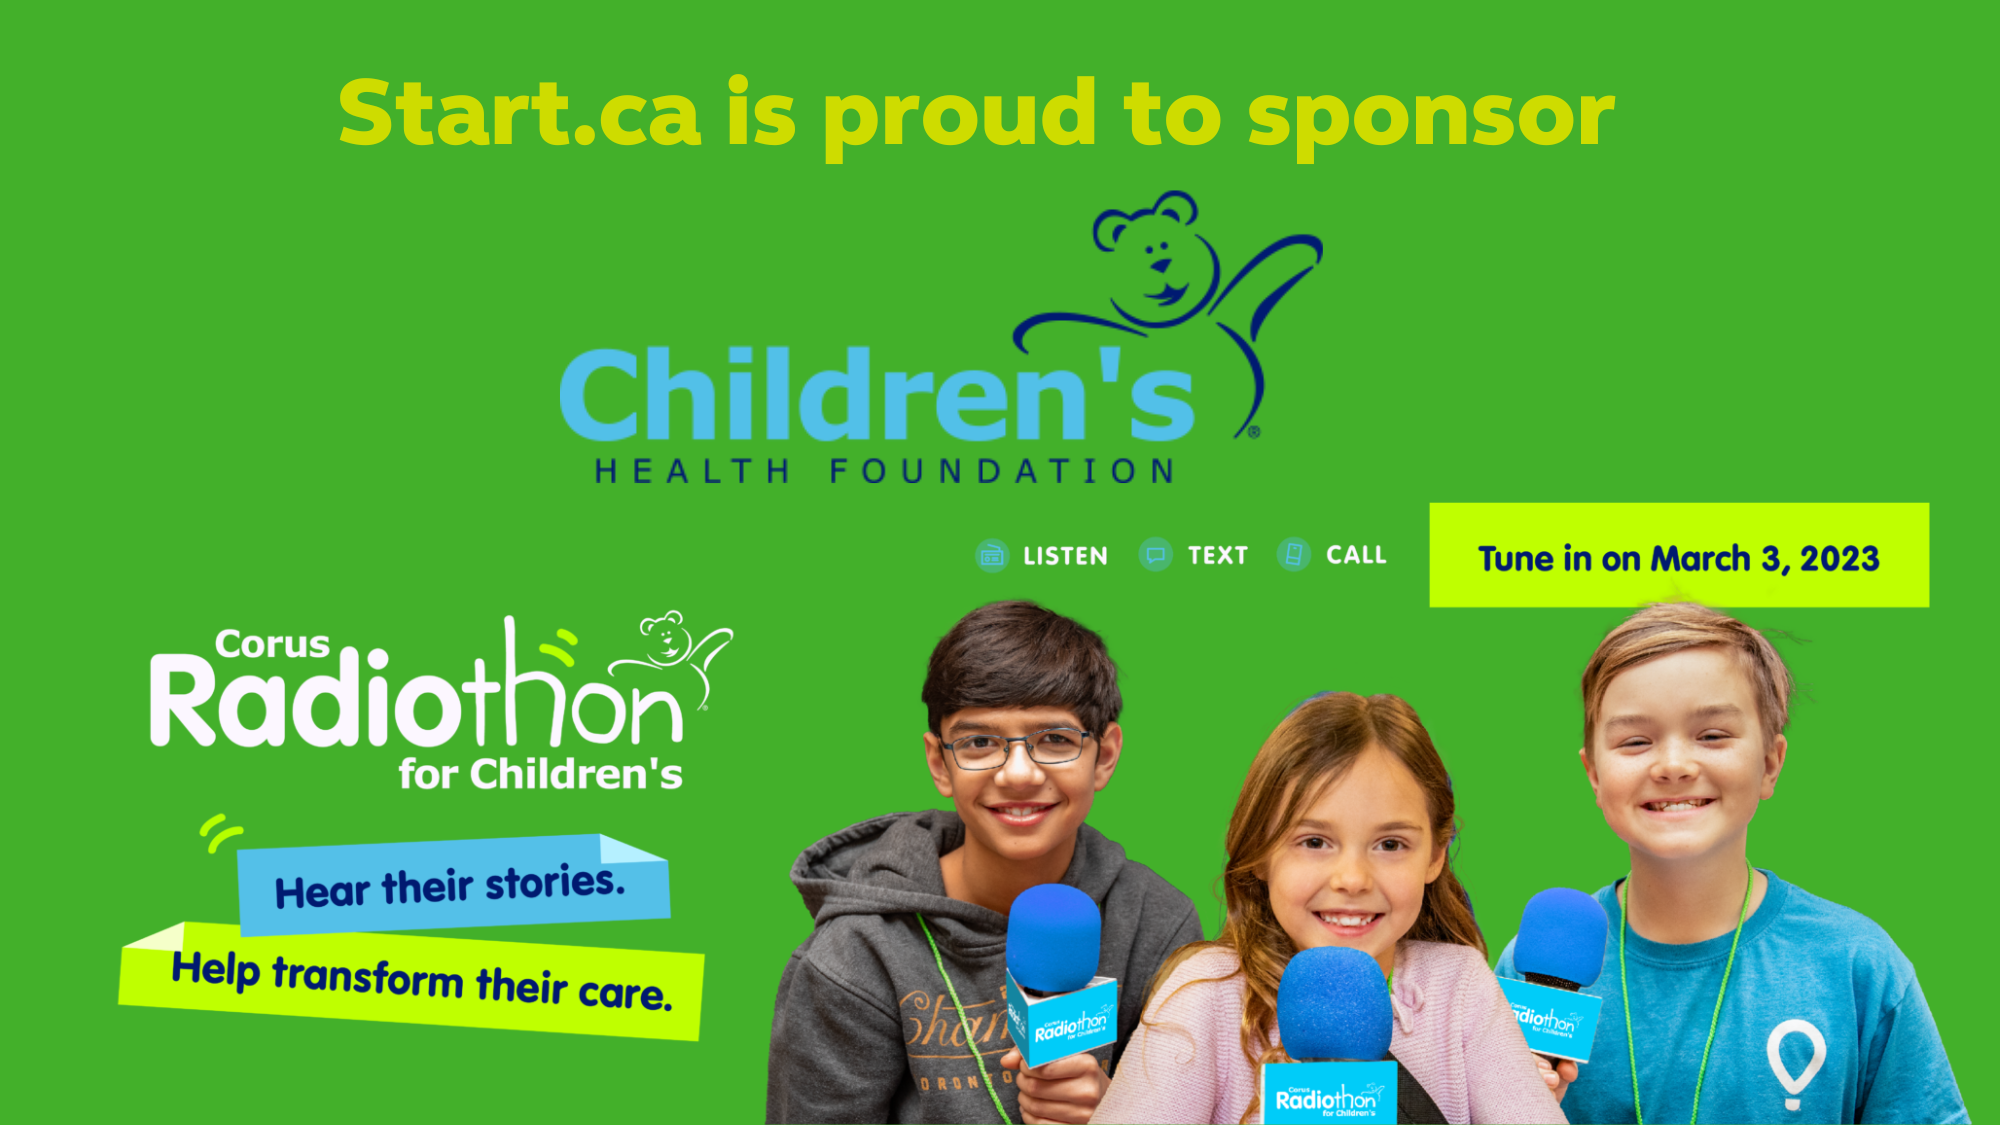 Start.ca is proud to sponsor the Corus Radiothon for Childrens Health Foundation